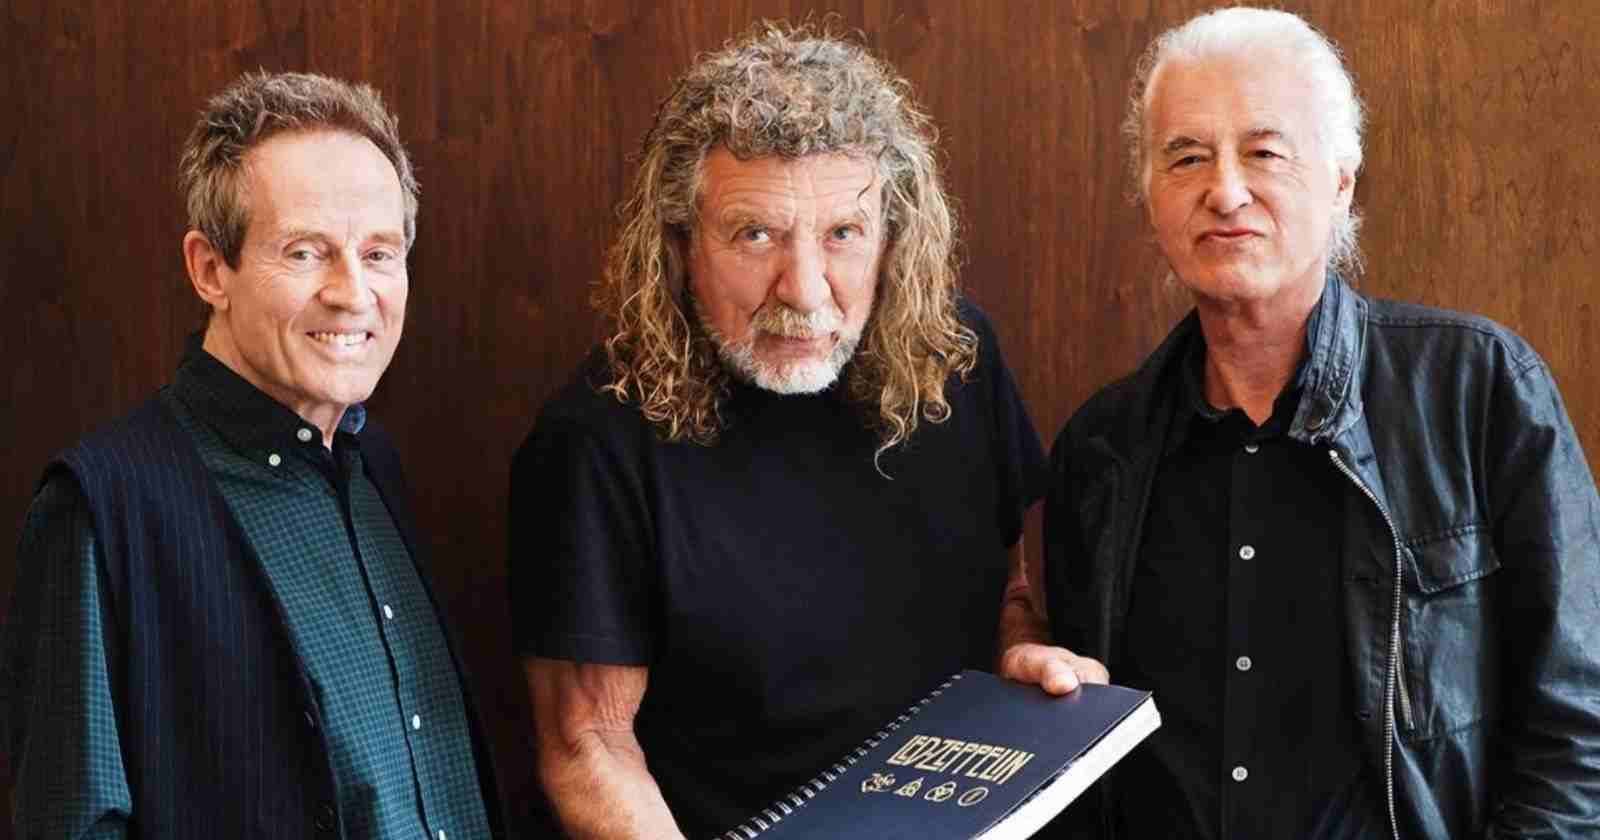 reason Led Zeppelin did not continue after the reunion